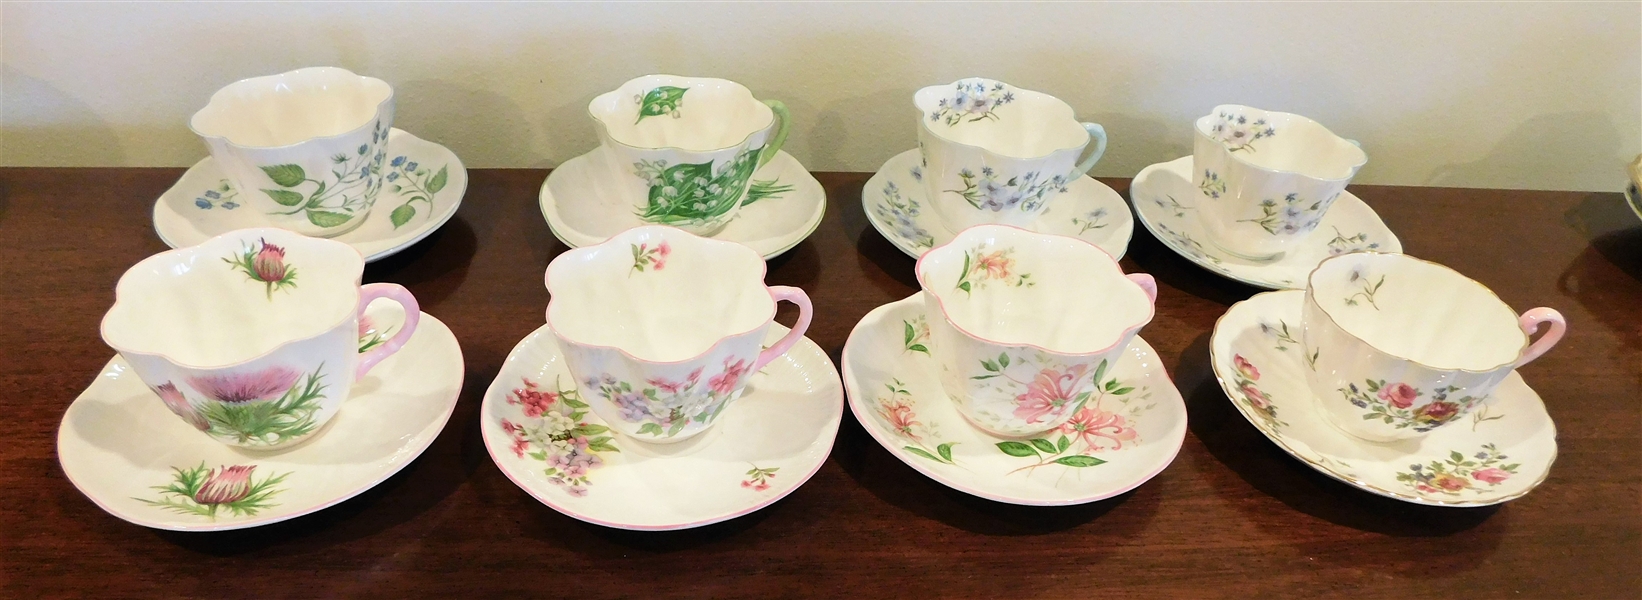 8 Shelley England  Cup and Saucer Sets